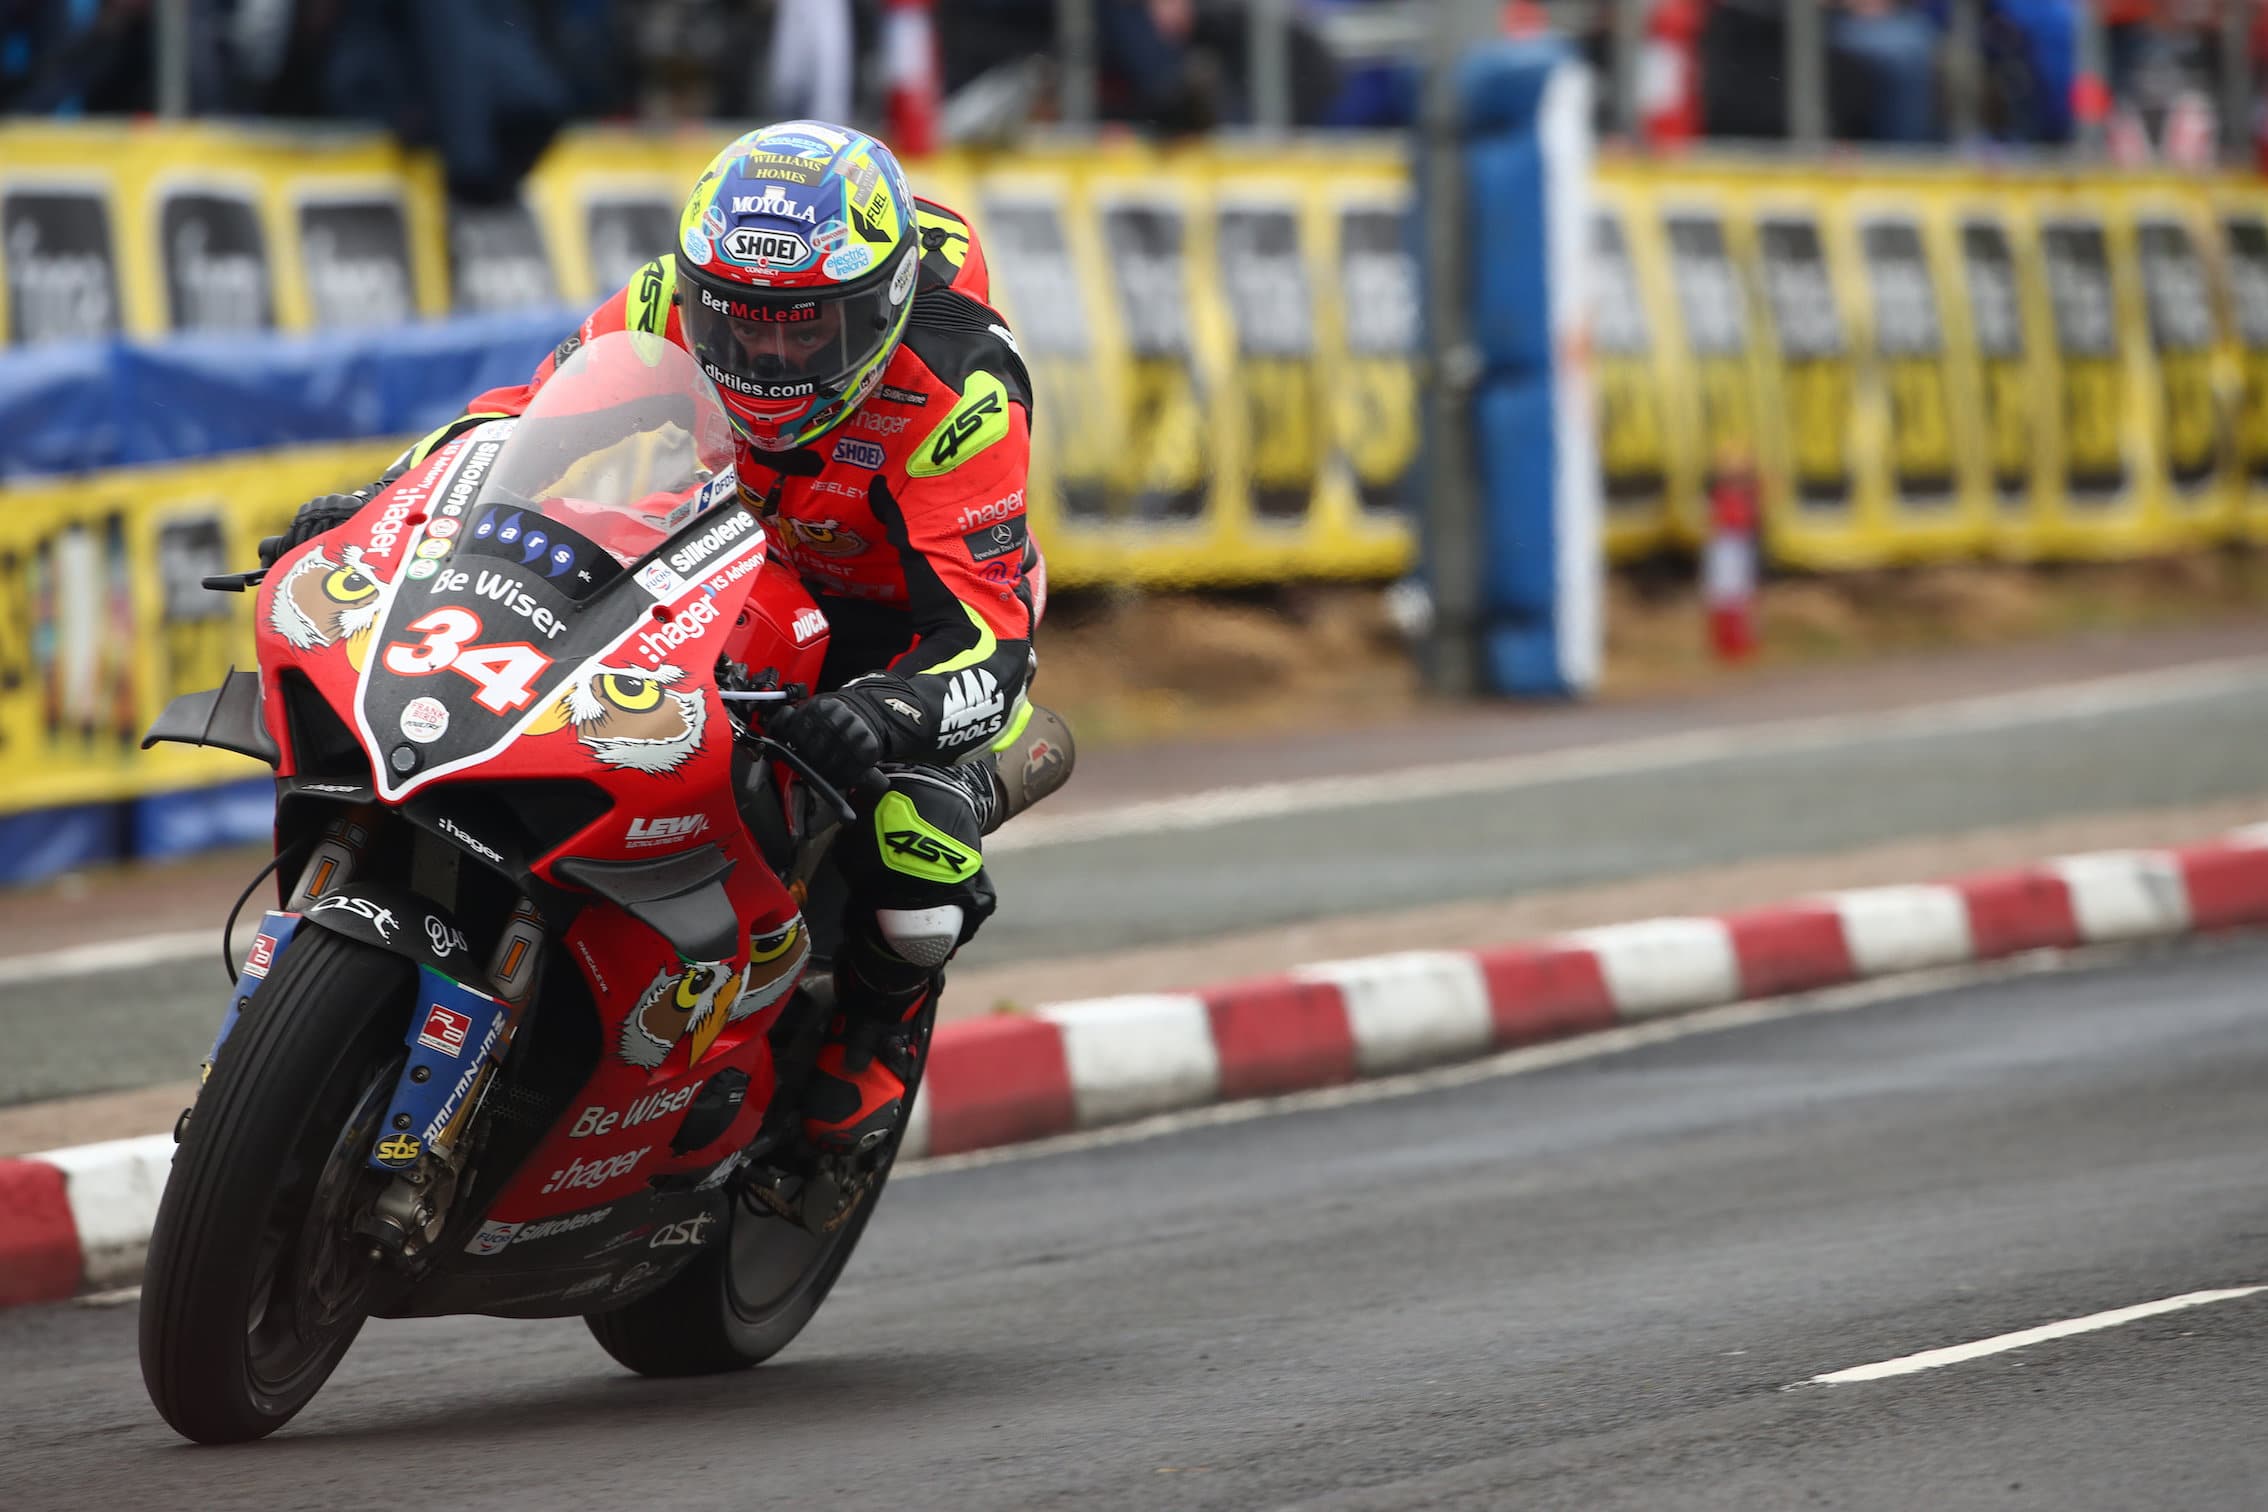 Seeley at the North West 200 in 2019